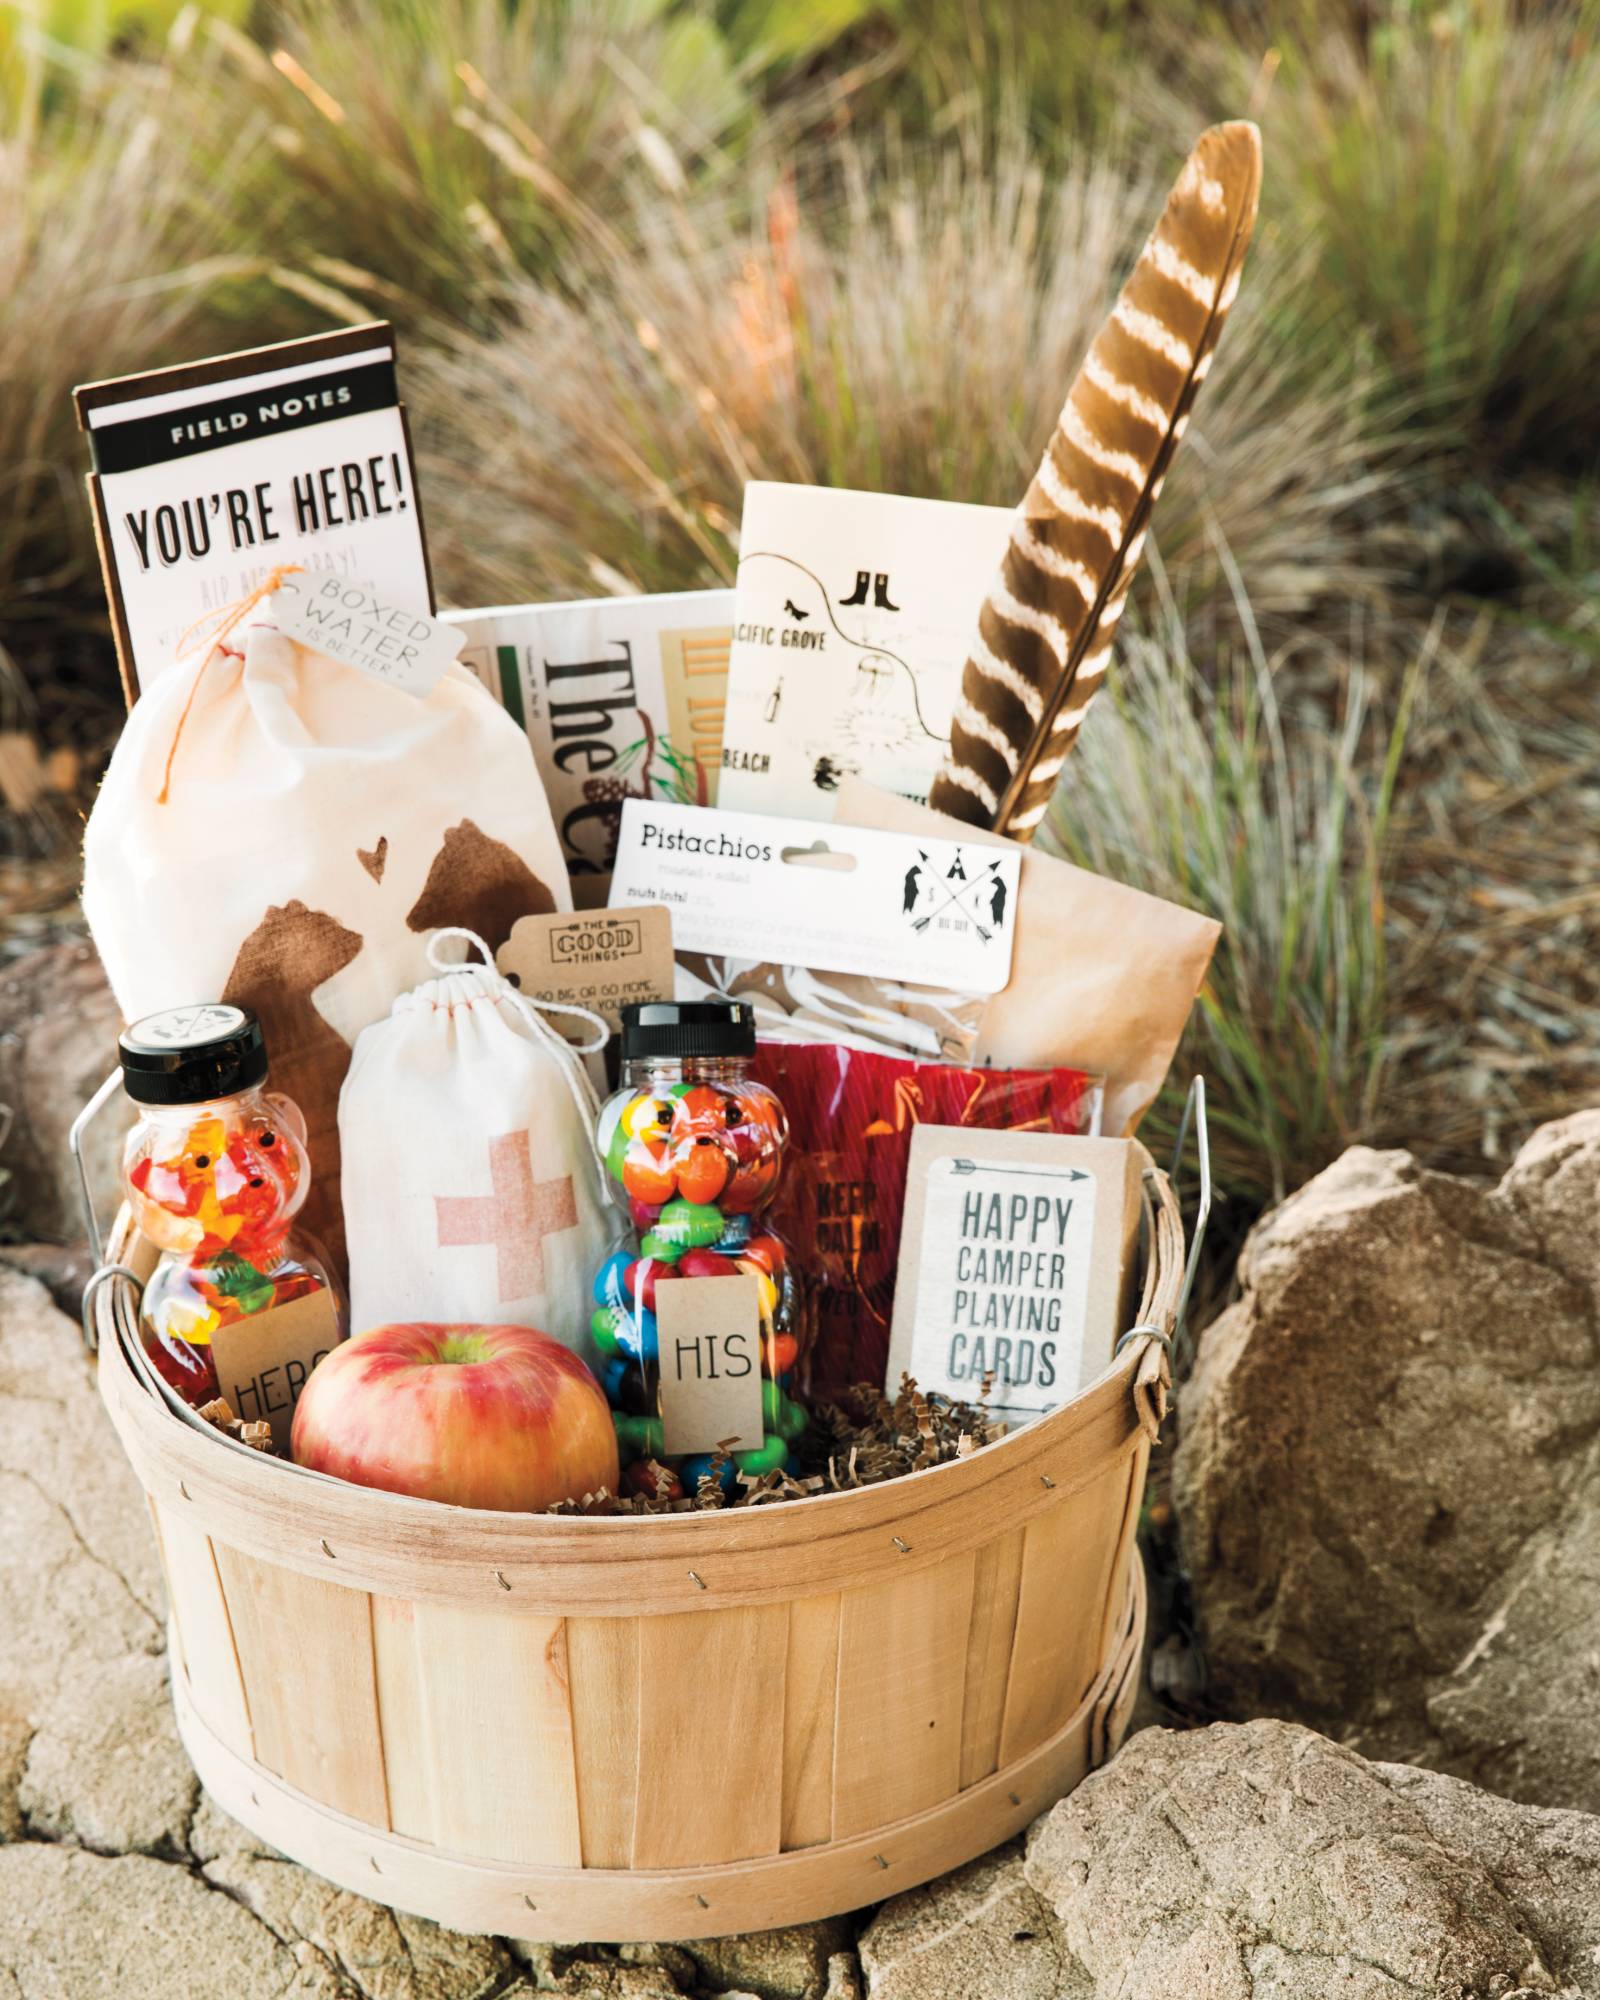 5 Tips for Making an Awesome Wedding Welcome Bag